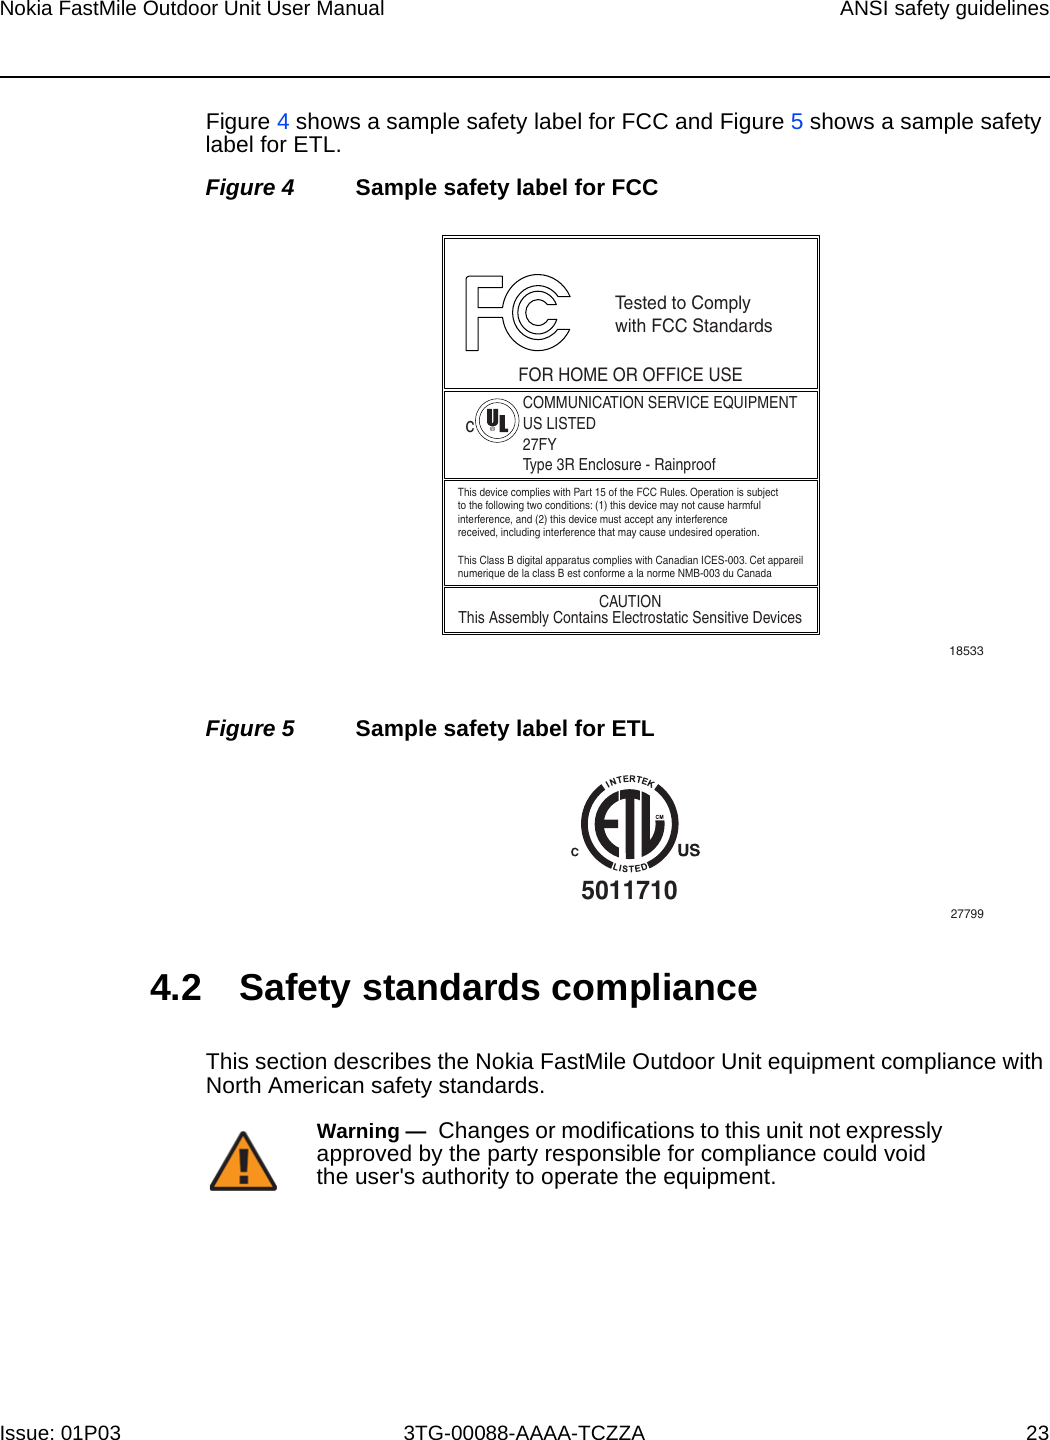 Page 21 of Nokia Bell 34003800FM20 FastMile Compact User Manual Nokia FastMile Outdoor Unit